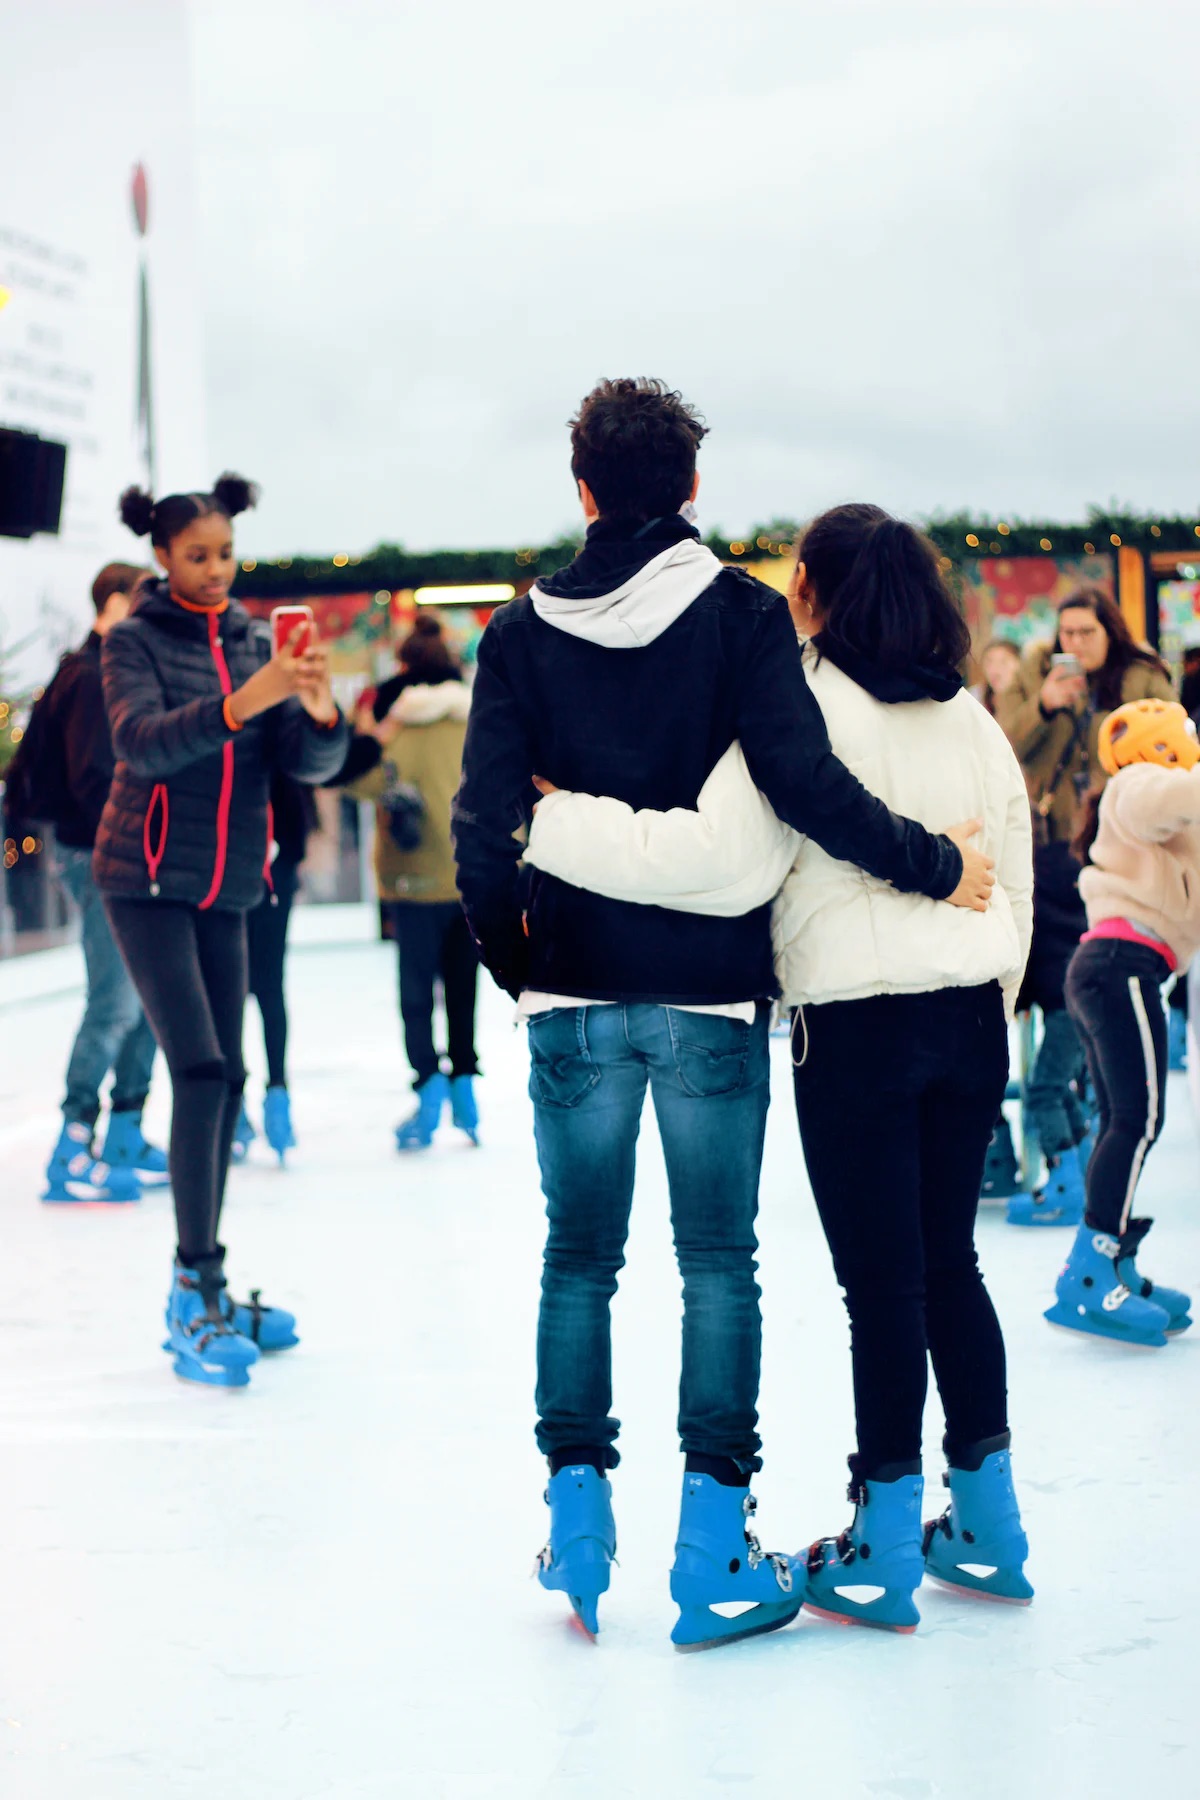 An image of two people on ice skates having their picture taken.